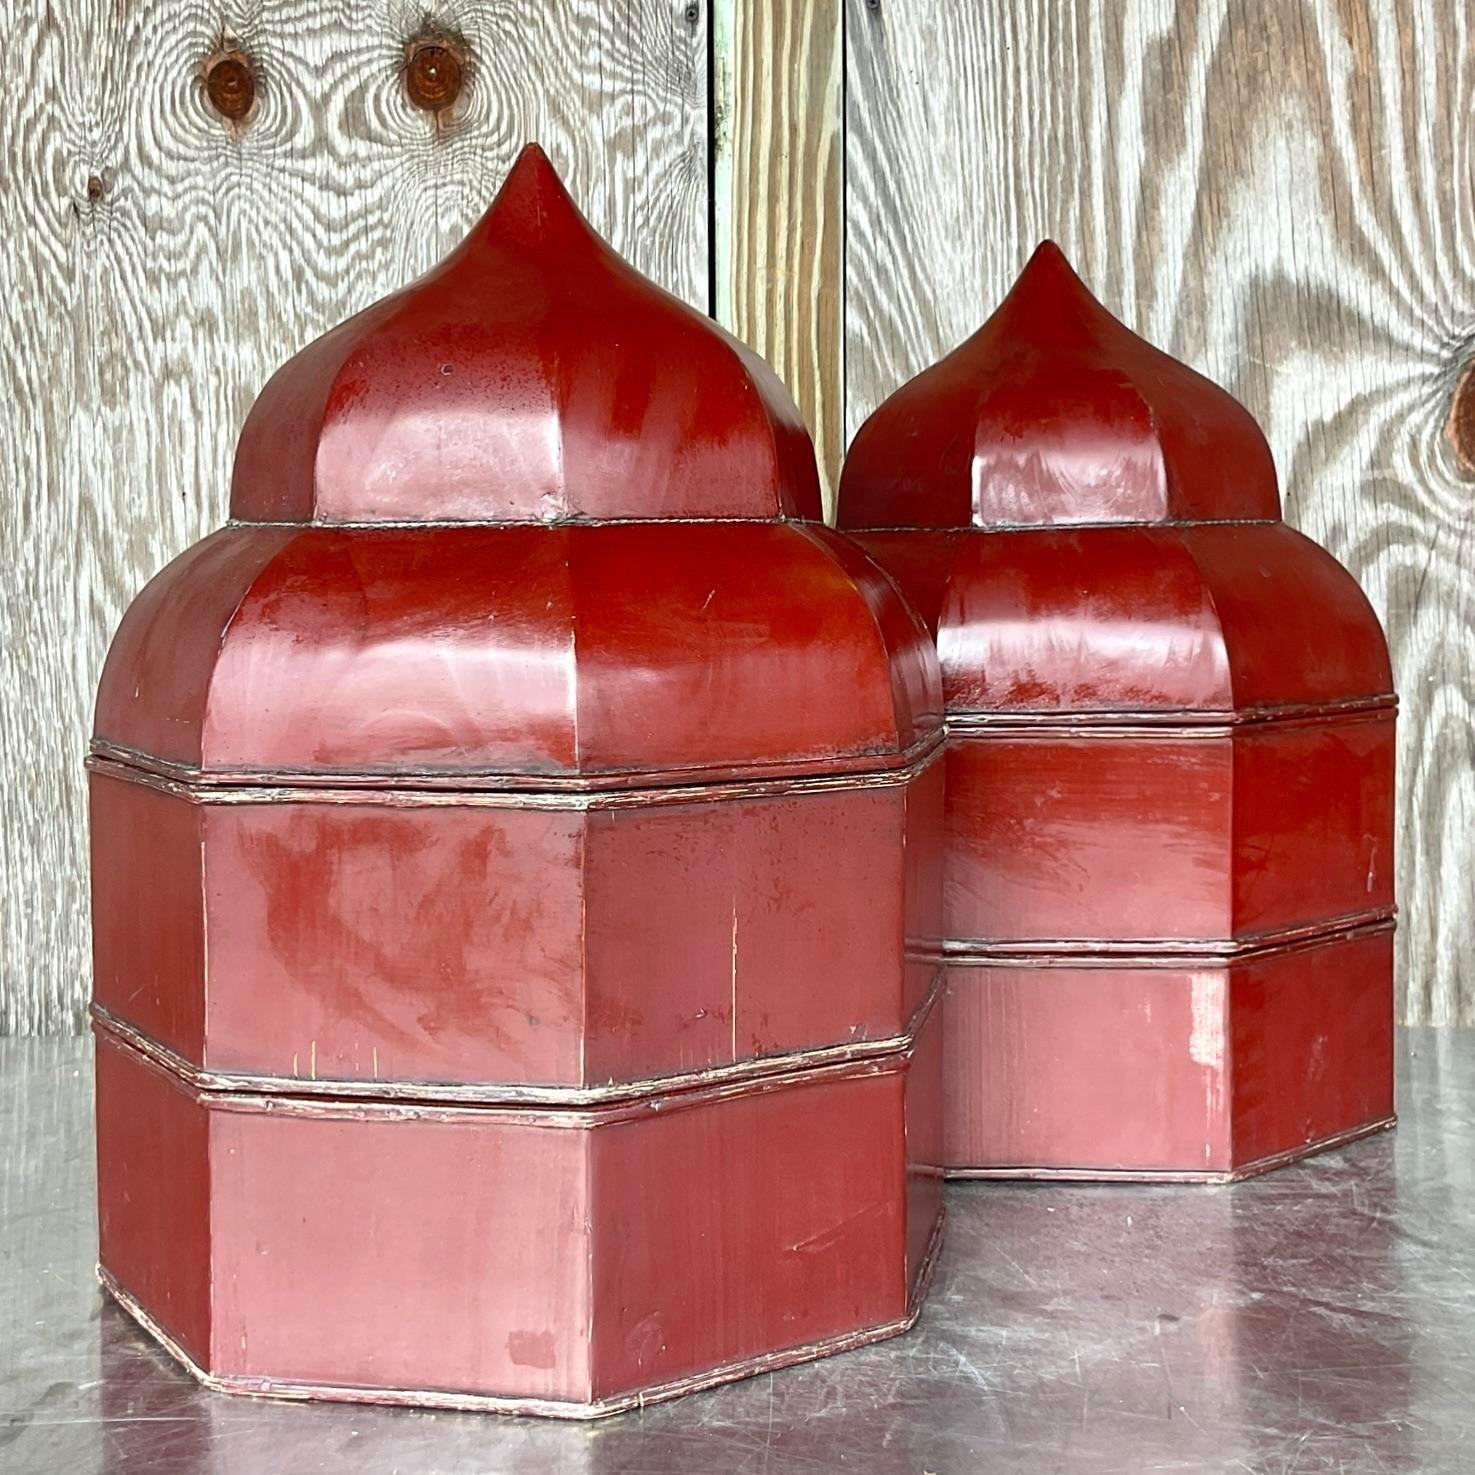 A stunning pair of vintage Boho boxes. A chic octagon shape with a lacquered merlot finish. Gorgeous wood grain interiors. Acquired from a Palm Beach estate.